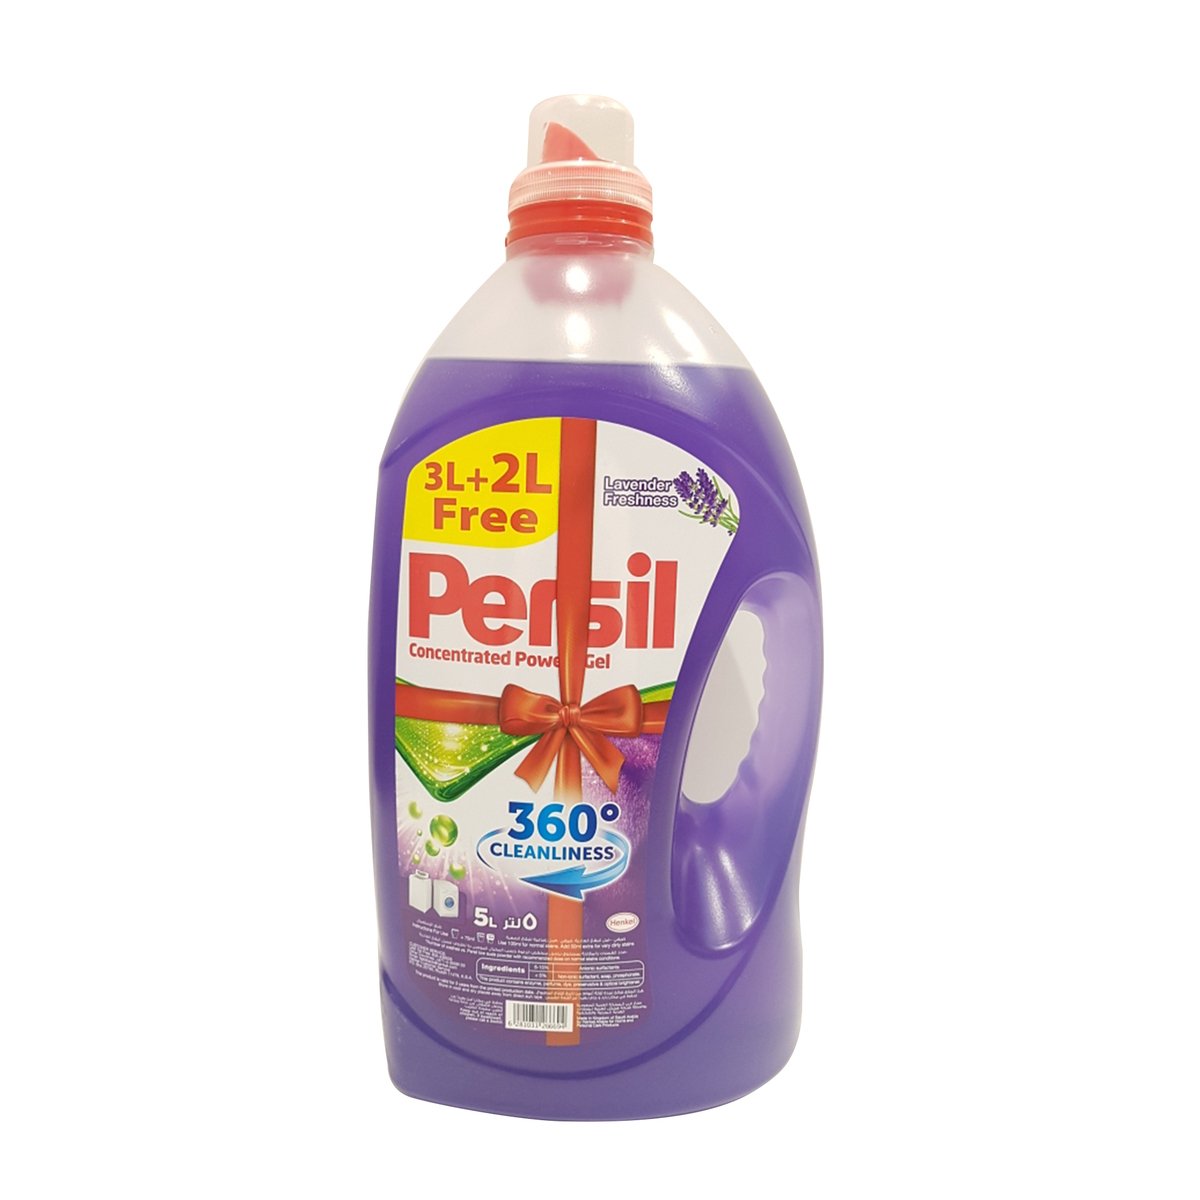 Persil Concentrated Power Gel Lavender Freshness 3Litre + 2Litre Free